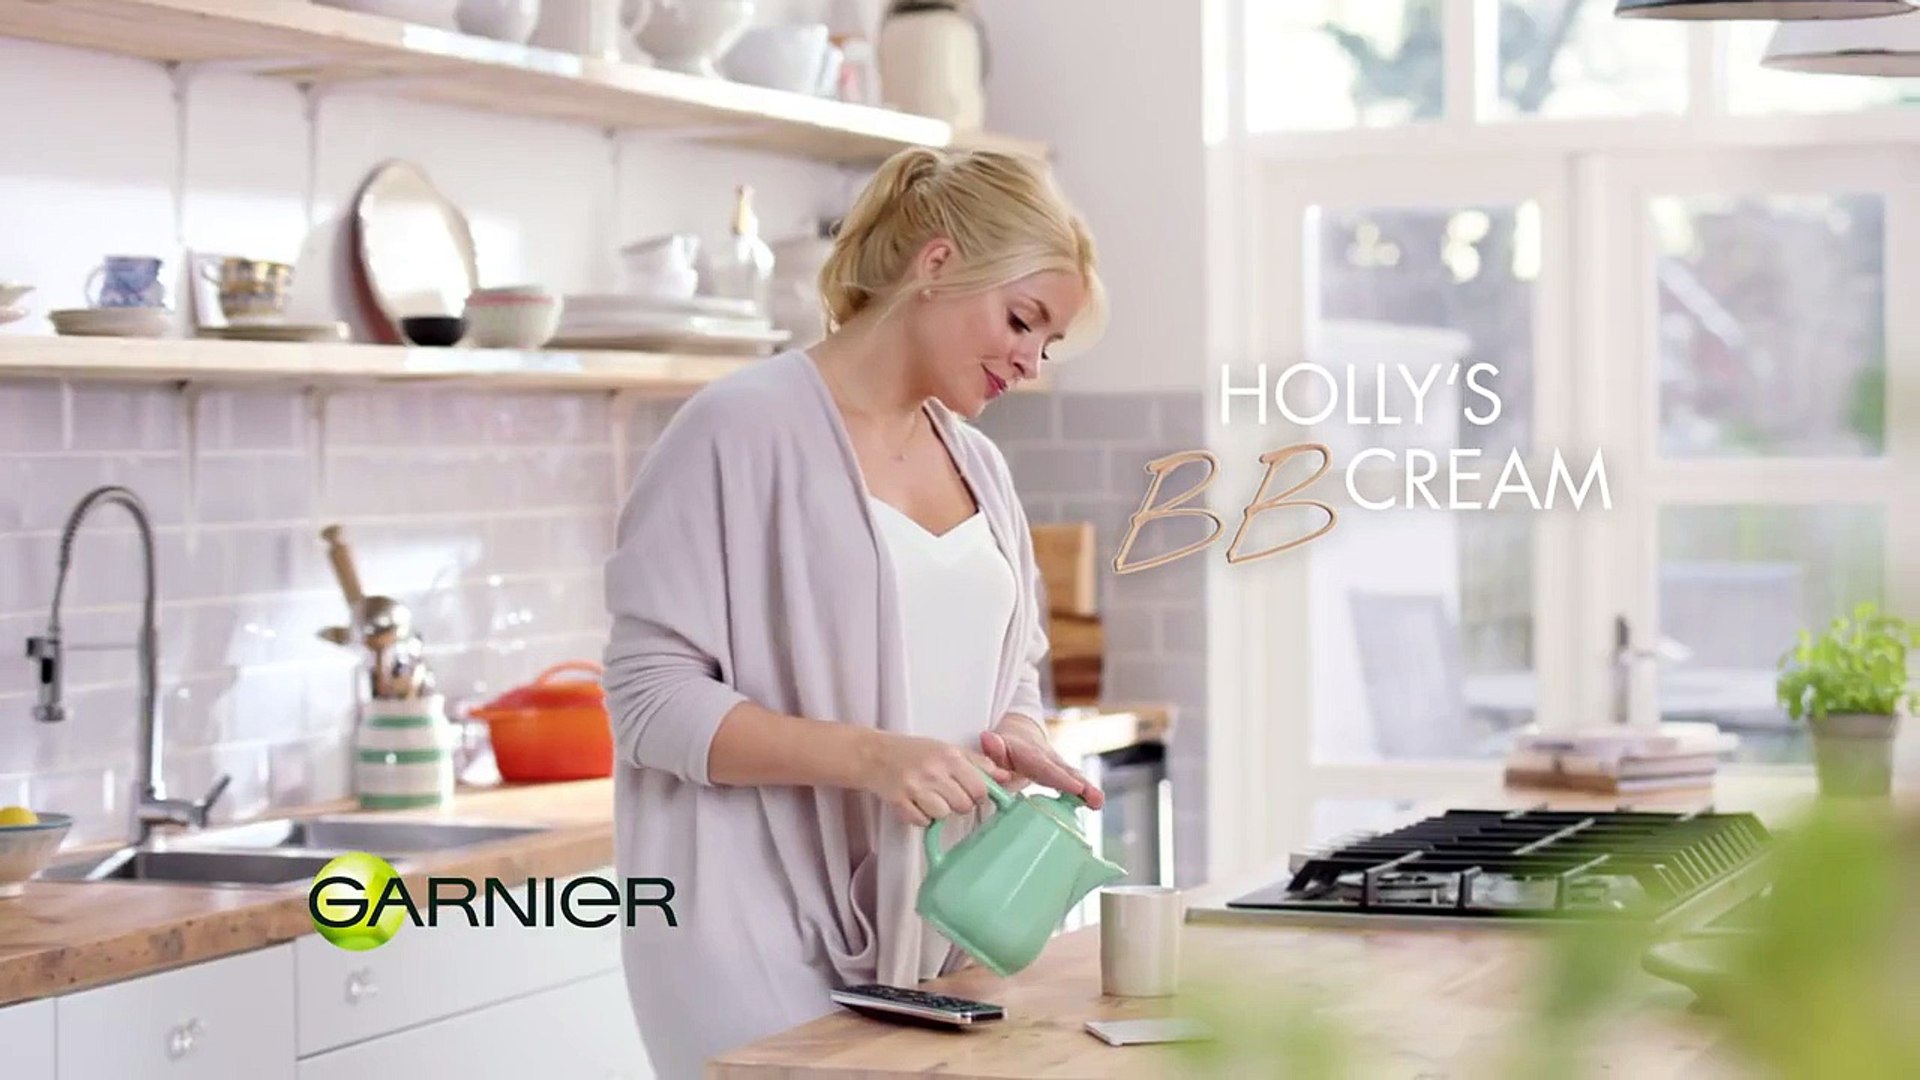 Garnier | BB Cream with Holly Willoughby - video Dailymotion